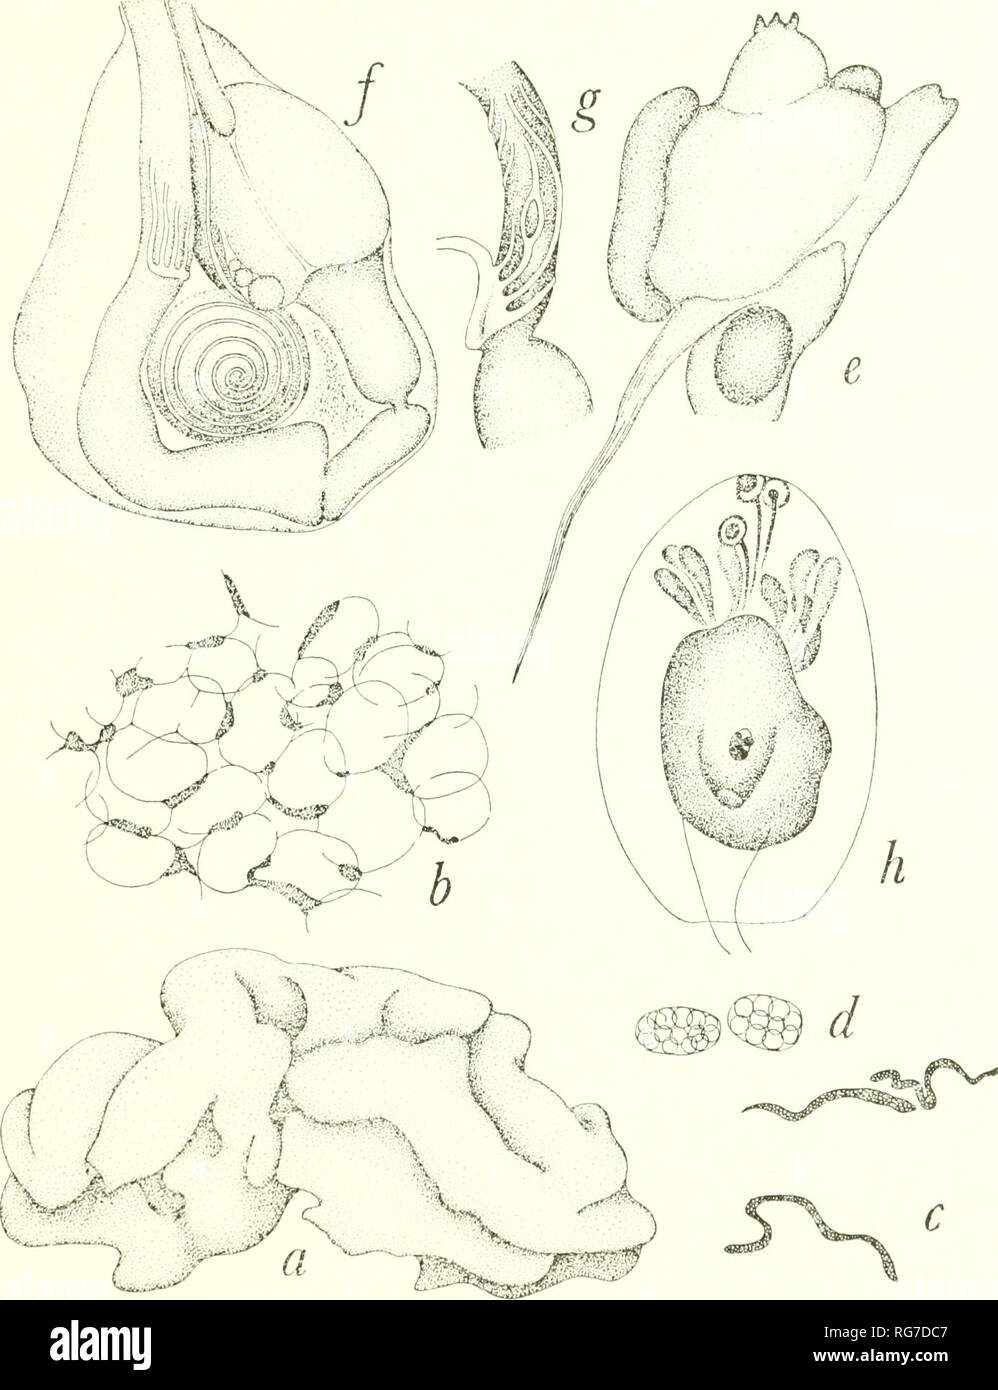 . Bulletin - United States National Museum. Science. PACIFIC TUNICATA OF U.S. NATIONAL MUSEUM 83 r' s. Figure 27.— Trididemnum savignii var. jolense (Van Name): a, colony from Florida; b, pigment cells found between the bladder cells, Palau specimen; c, pigment cells from type specimen of Didemnopsis jolense Van Name, X 400; d, granular cells from the same specimen, X 400; e, left side of contracted thorax of zooid of a colony from Gilbert Islands, sta. GOC-55, X 100; /, abdomen of zooid of colony from Gilbert Islands, sta. GOC-41, X 100; g, circumintcstinal gland of a zooid of a colony from  Stock Photo